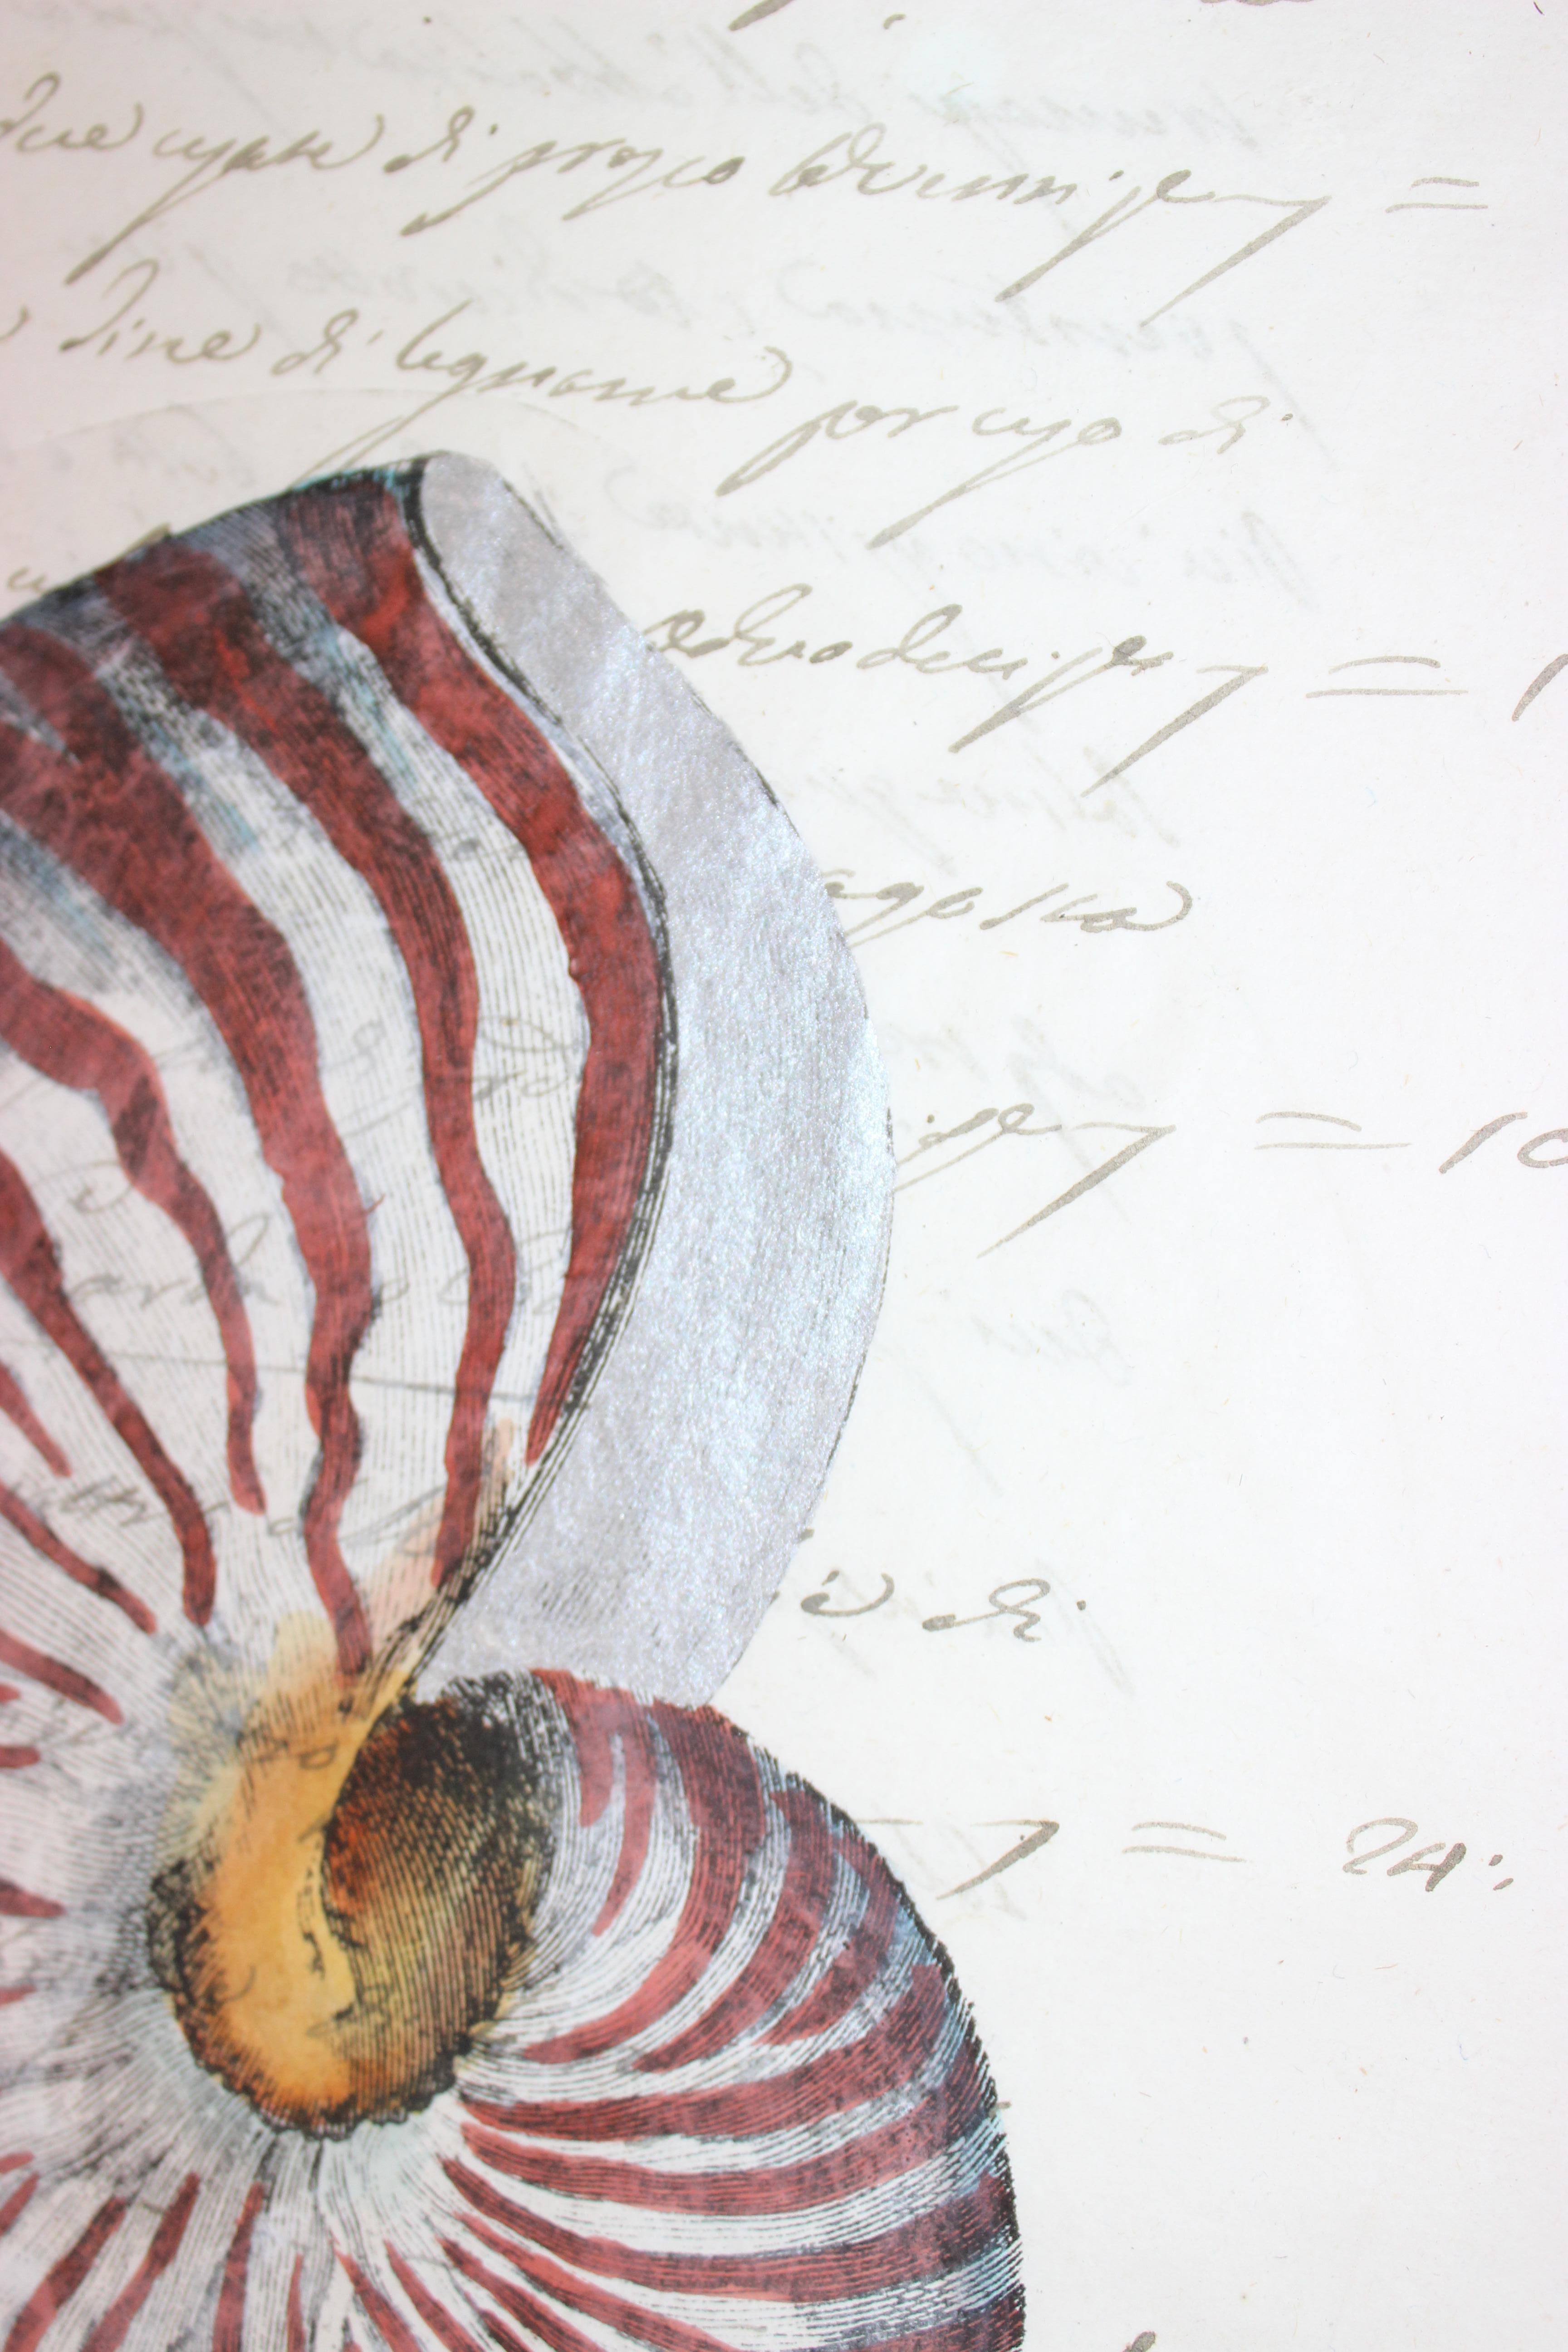 This hand painted nautilus shell on a piece of parchment paper (that dates to the early 19th century) will make a definite stylish statement.

Note: Dimensions of image paper are 12